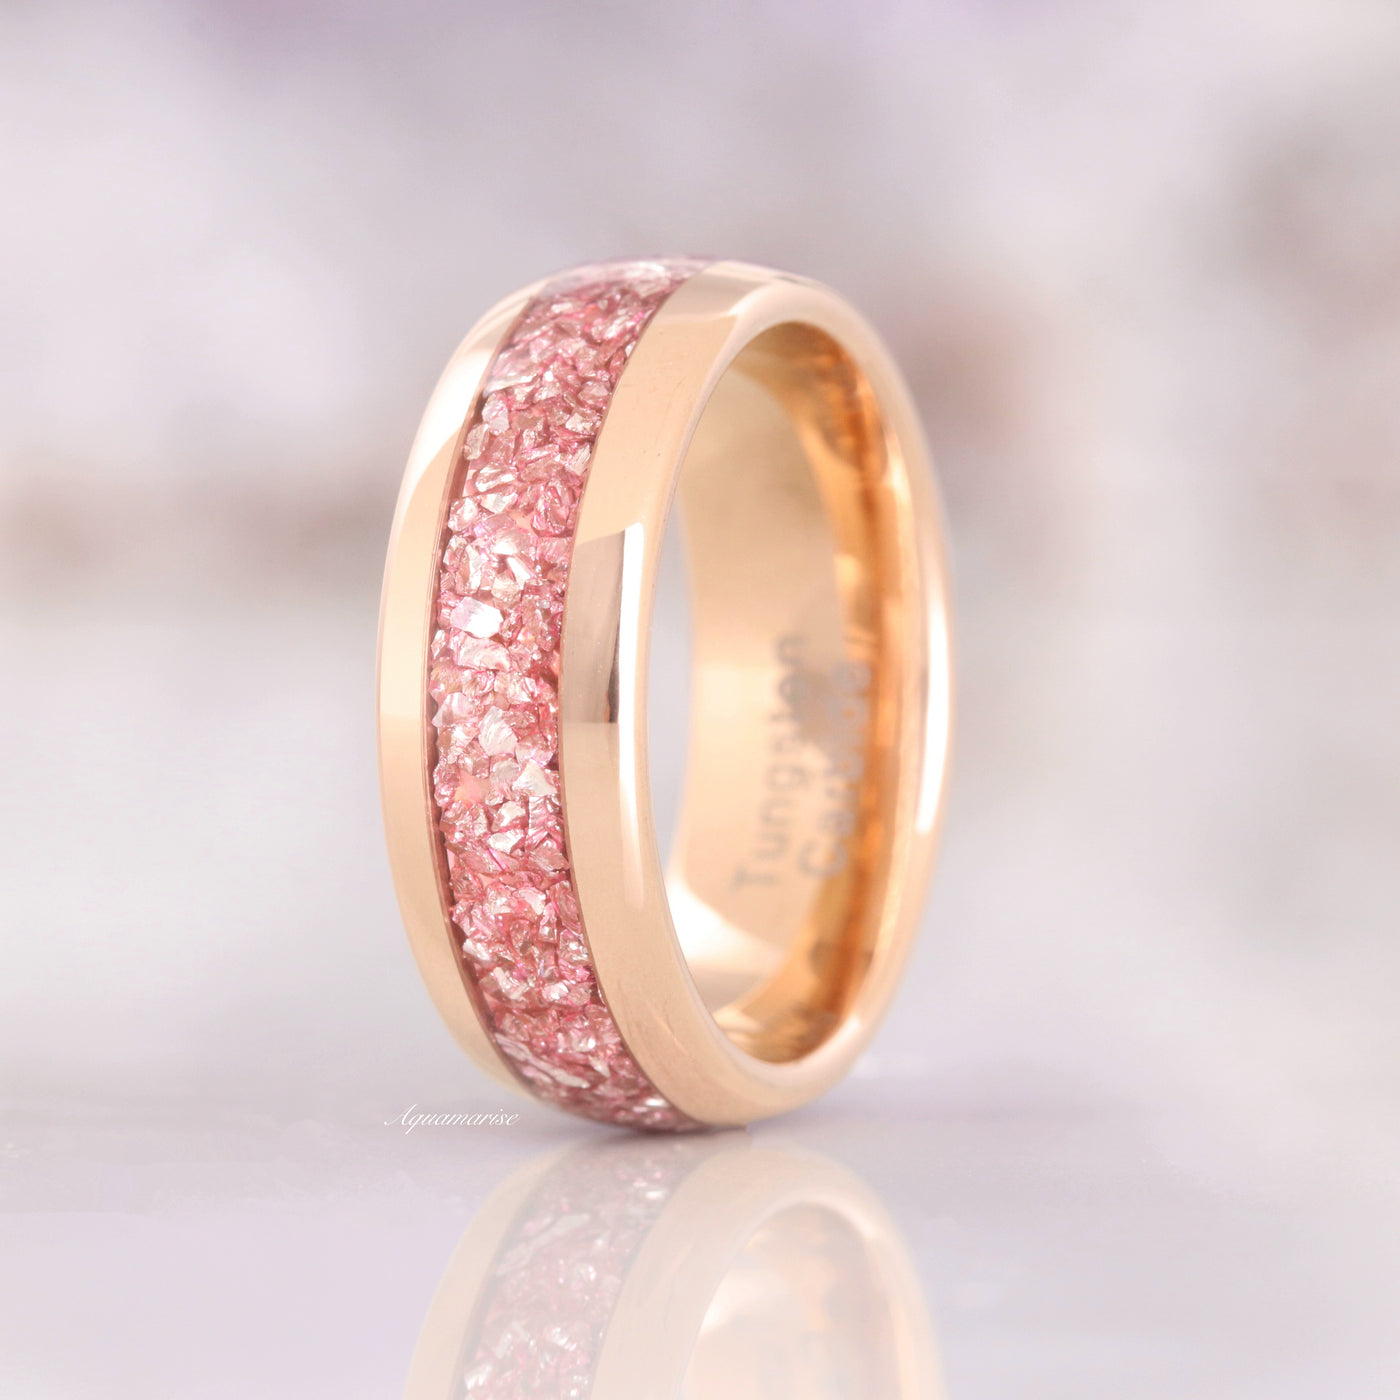 Pink Morganite Ring Rose Gold Tungsten Ring Womens/ Mens Wedding Band- Comfort-Fit Dome Polished- Anniversary Ring- Statement Ring 8mm Ring